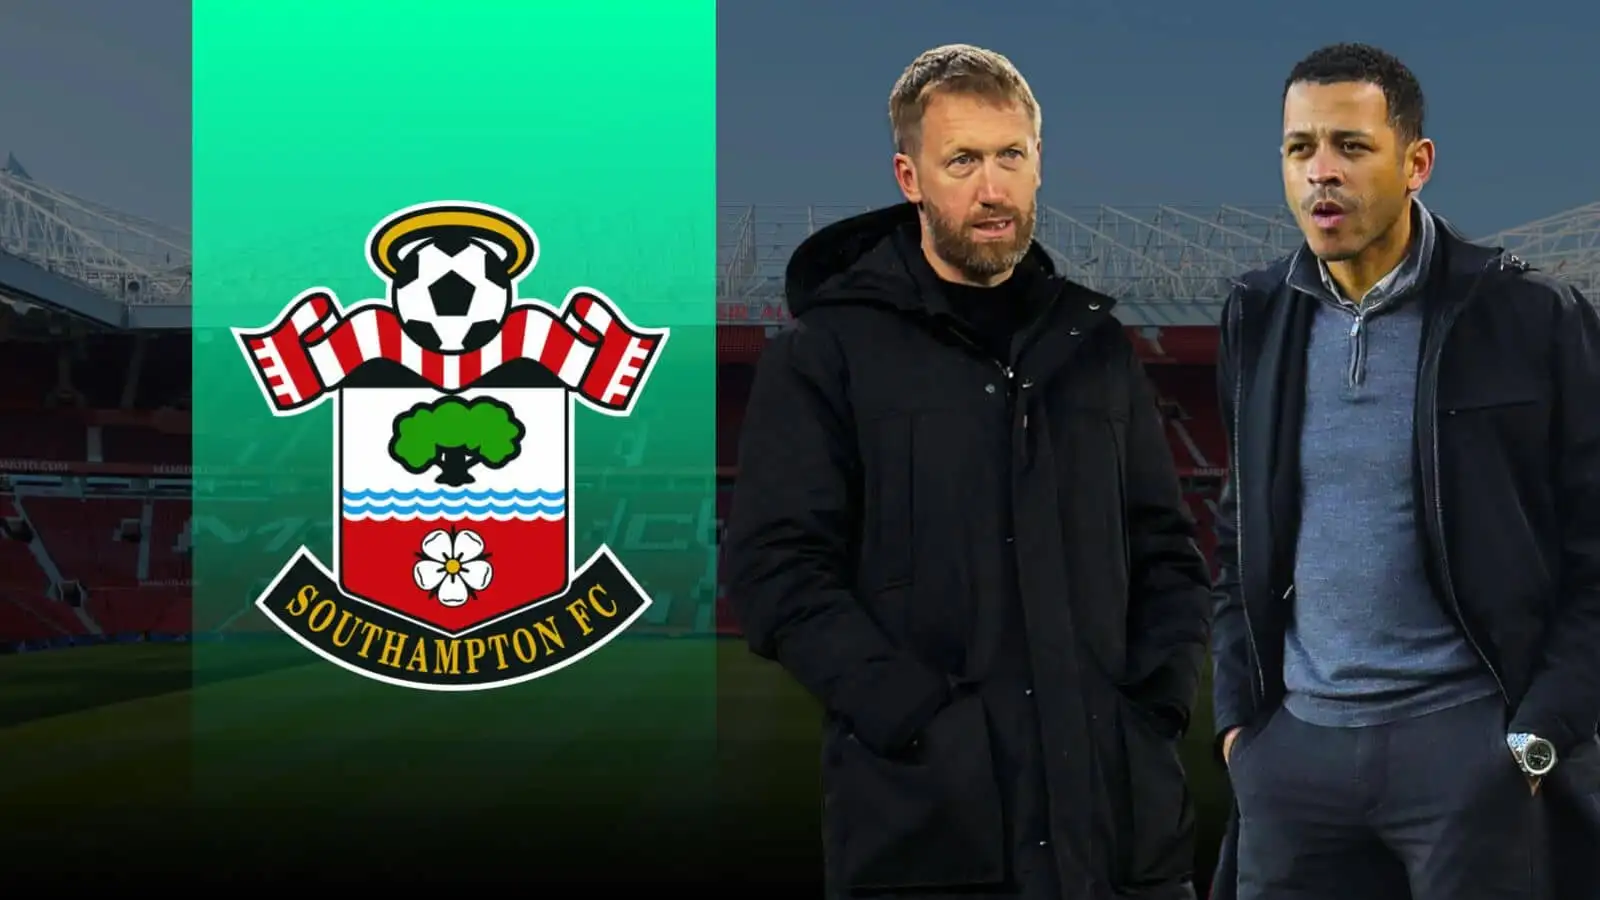 Southampton manager contenders Graham Potter and Liam Rosenior